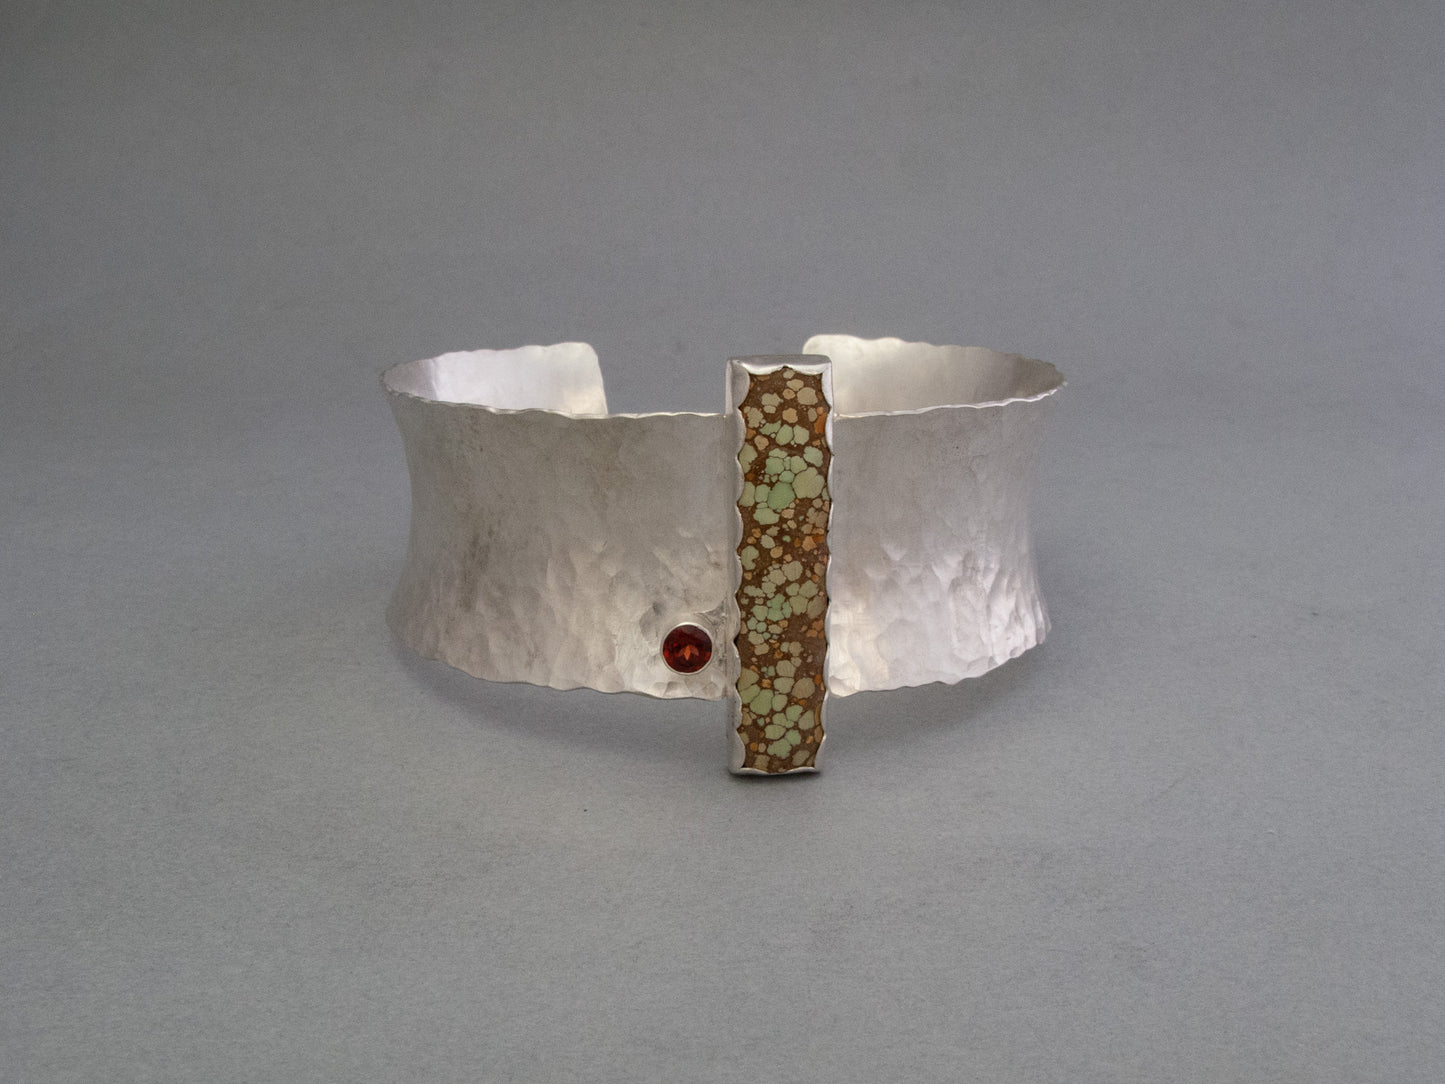 Hubei Turquoise and Garnet Statement Cuff Bracelet in Hammered Sterling Silver